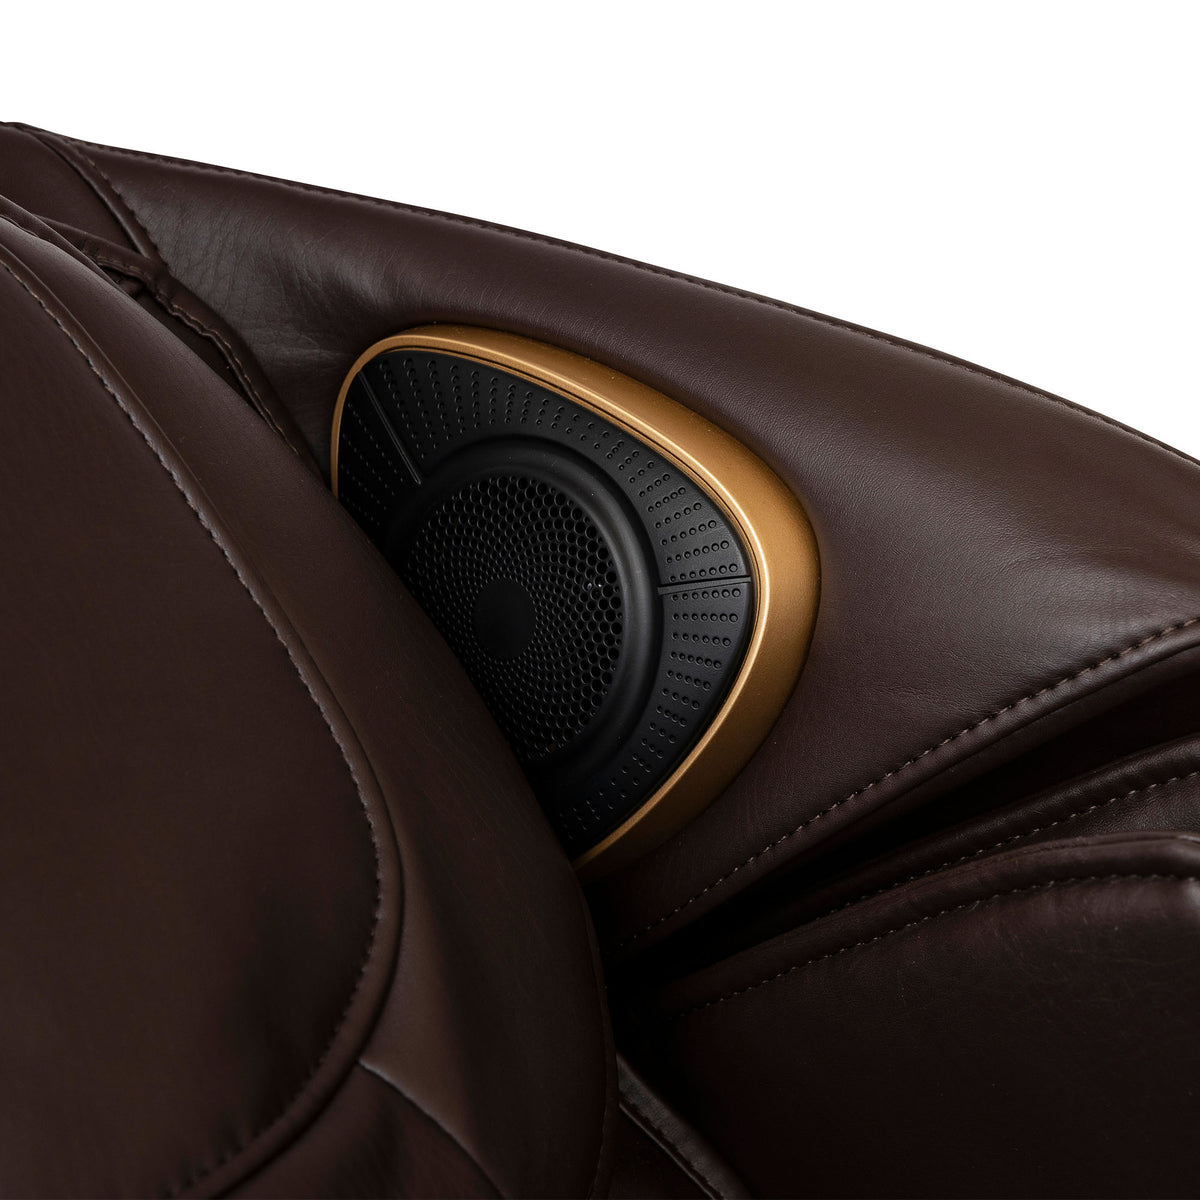 Inner Balance Wellness Jin 2.0 Massage ChairRear view of the built-in speaker on a brown leather Inner Balance Wellness Jin 2.0 Massage Chair